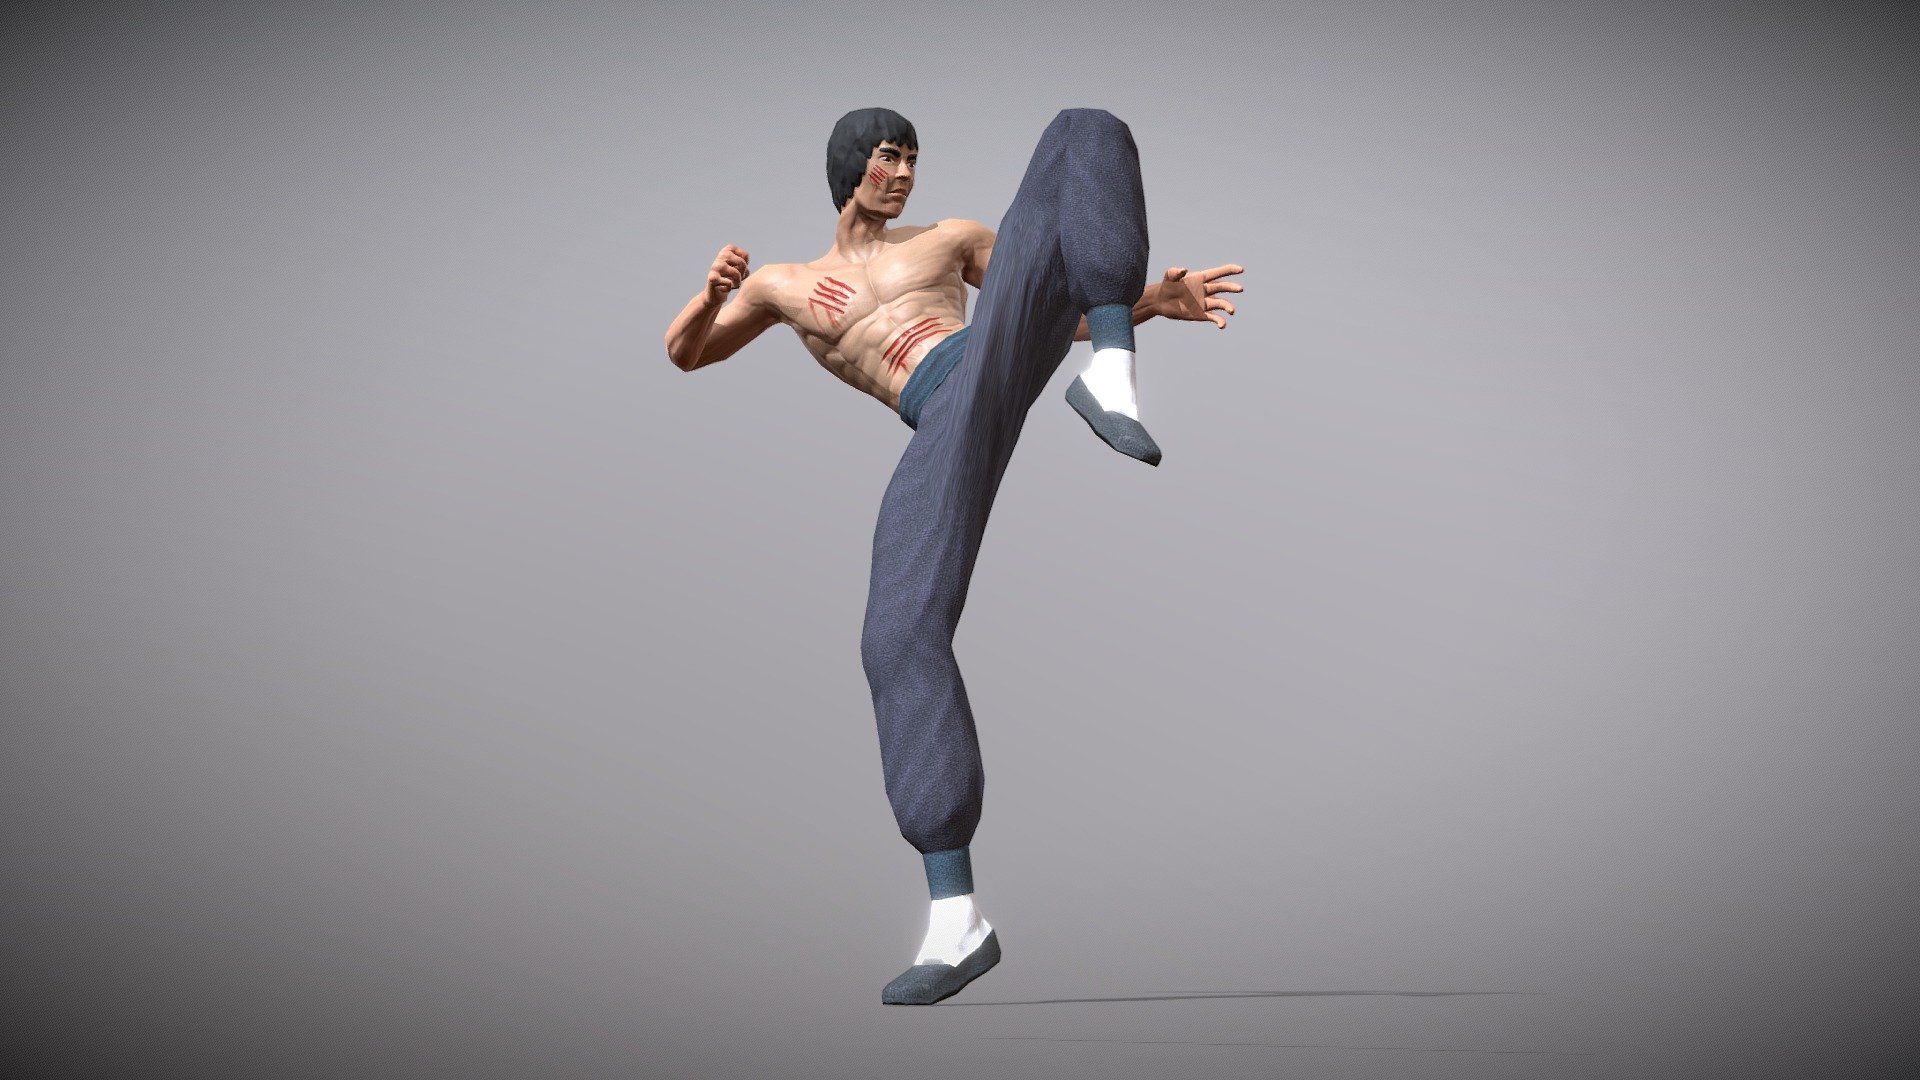 Game ready low poly Bruce Lee model based off his epic final fight in Enter the Dragon. I remember seeing the now legendary poster with all the scratches and  blood hanging up in my dad's workshop. To this day I love that movie. Created in Blender and Substance Painter with the animation coming from Mixamo.com. Texture maps are 1k 3d model